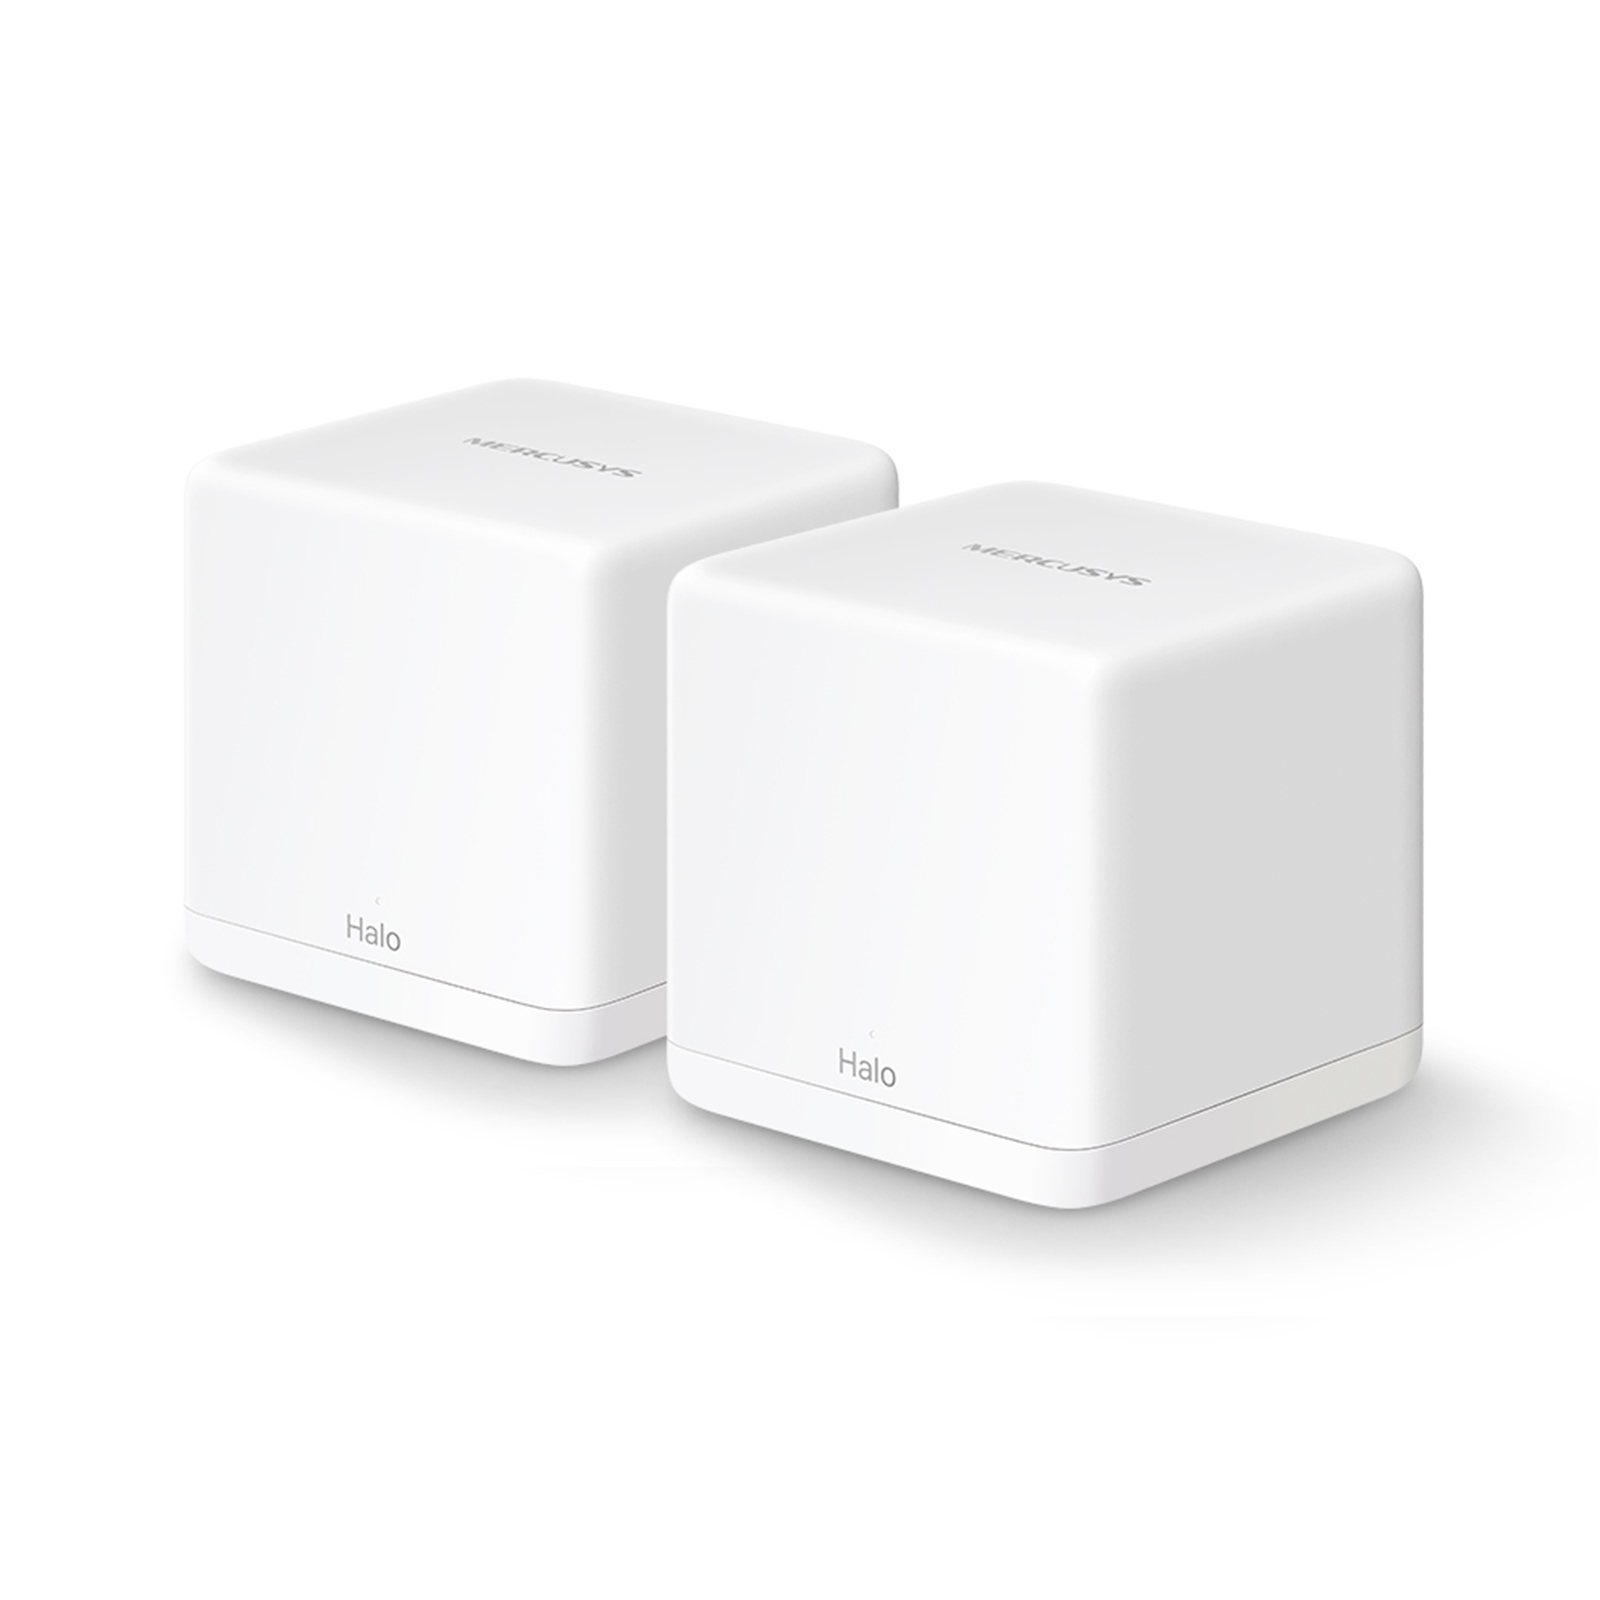 Mercusys Halo H30G (2-pack) AC1300 Whole Home Mesh Wi-Fi System, 867 Mbps on 5 GHz, 400 Mbps on 2.4 GHz, 2x Internal Antennas, 2x Gigabit Ports per Unit, Halo App, One Unified Network, Seamless Roaming